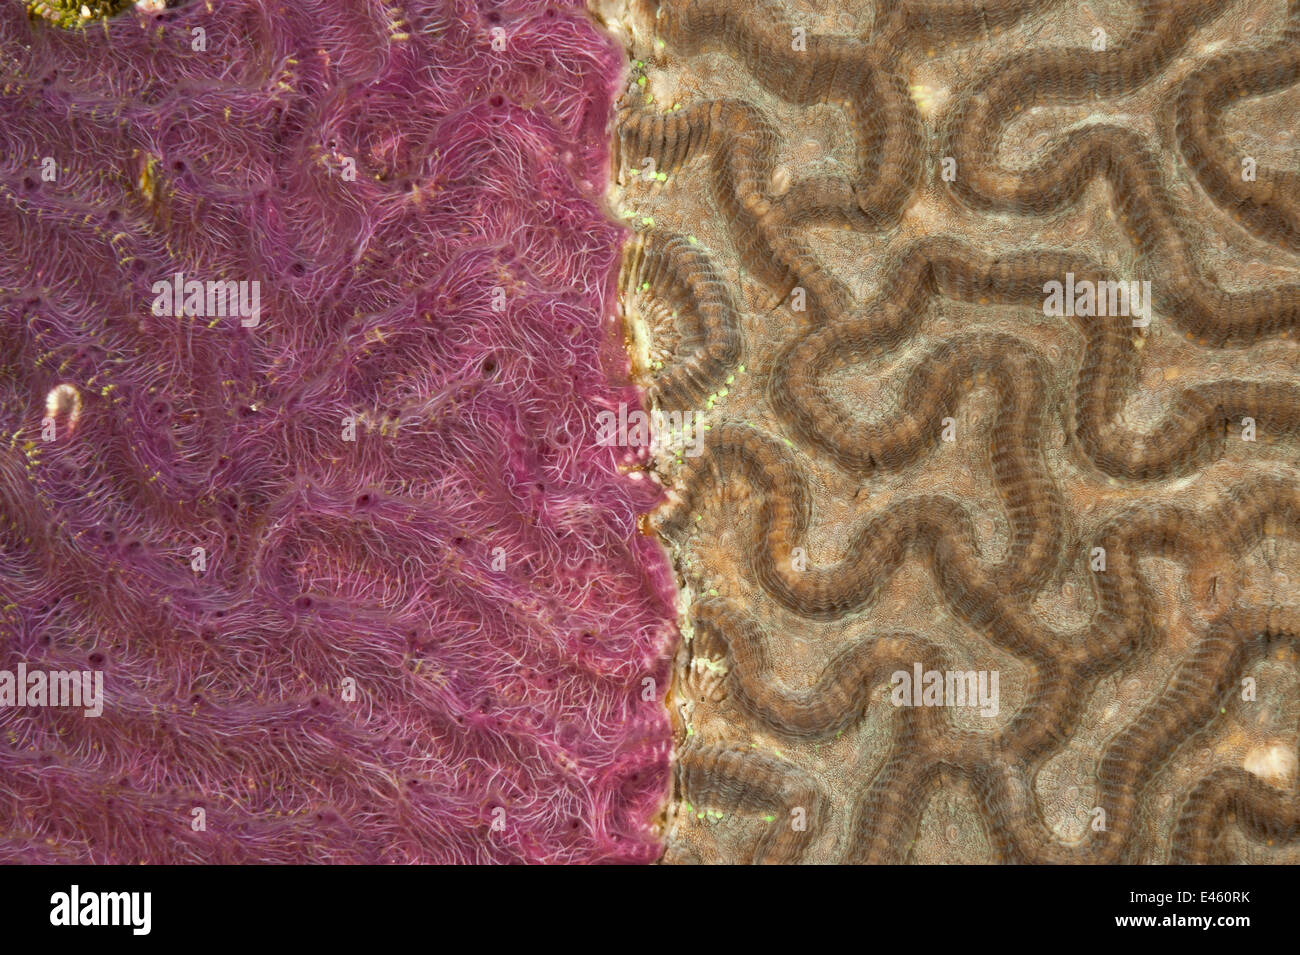 Hard brain coral (Platygyra sp) half covered with a pink algae, Moluccas Islands, Indo-pacific Stock Photo